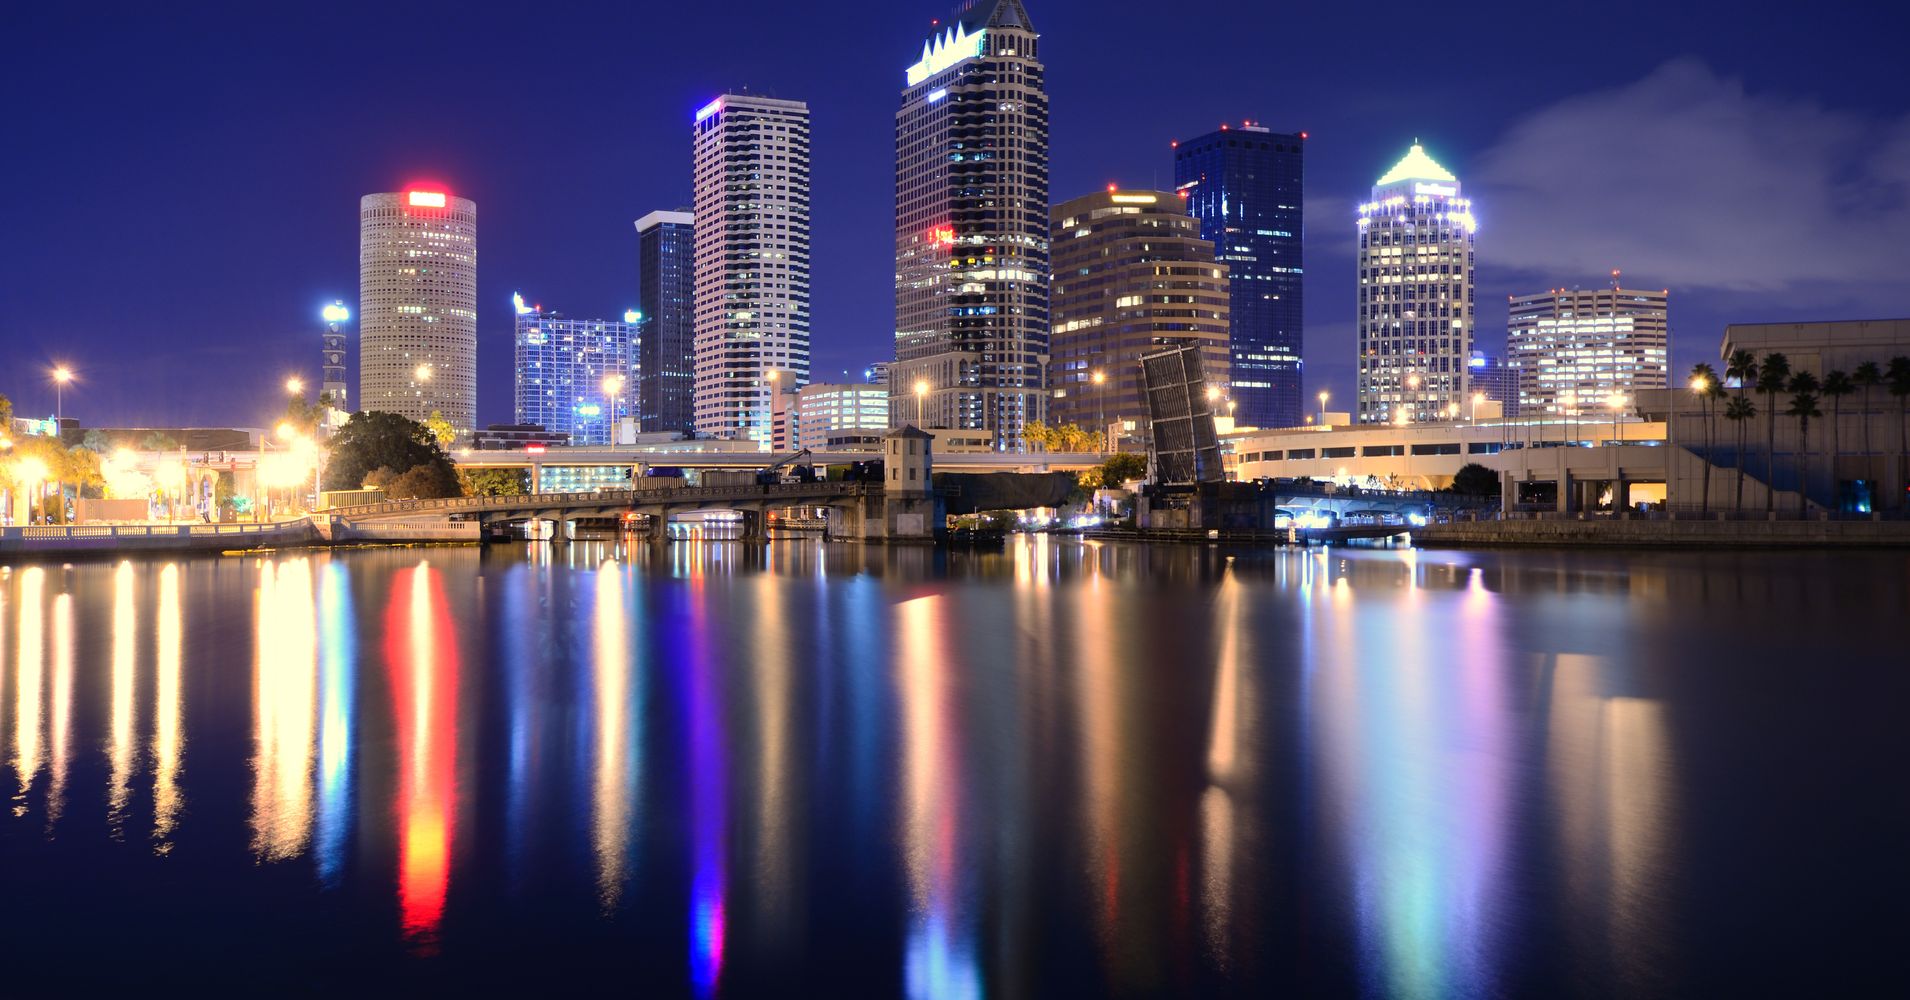 Tampa, On The Path To Becoming A Smarter City | HuffPost